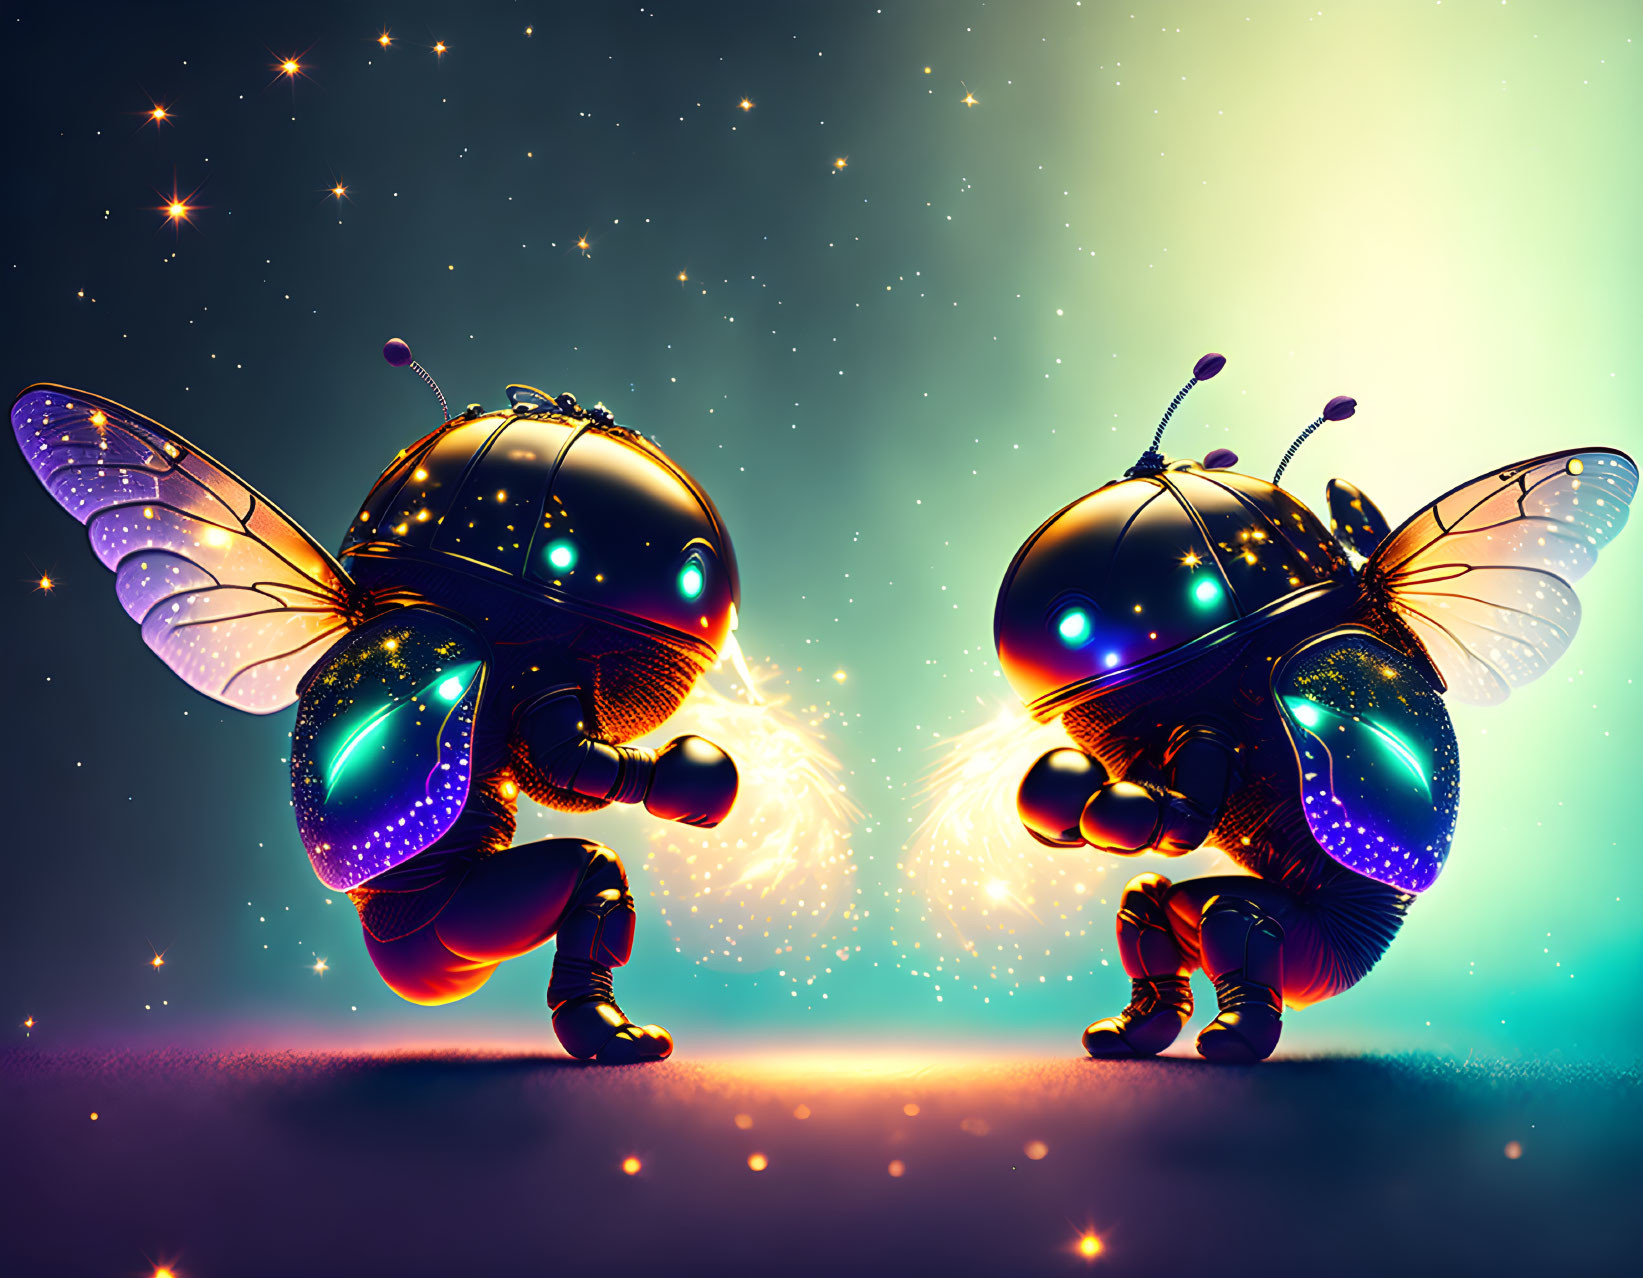 Futuristic robotic bees with glowing parts in starry sky.